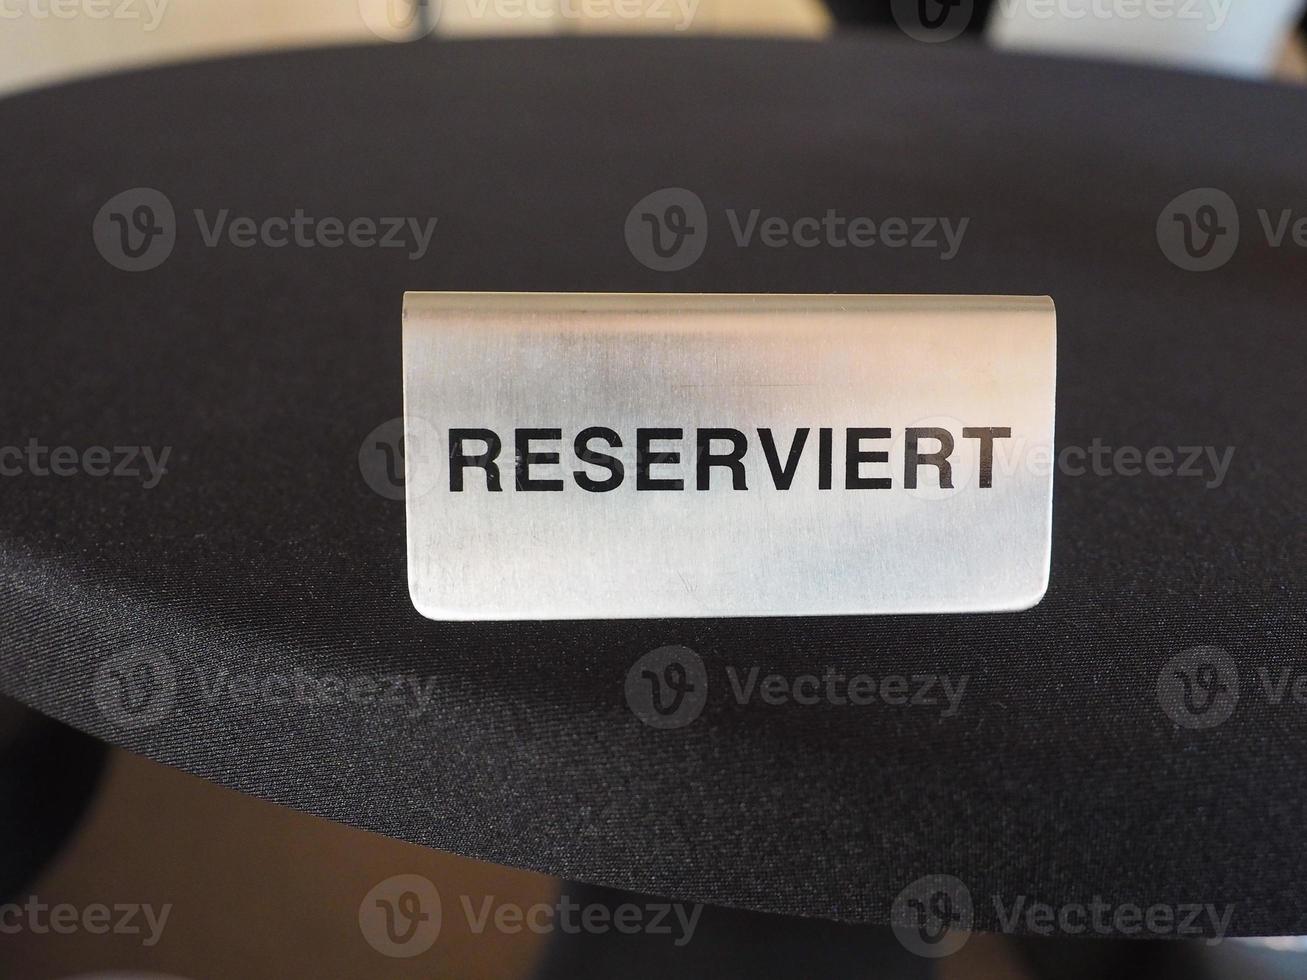 Reserviert reserved table sign photo